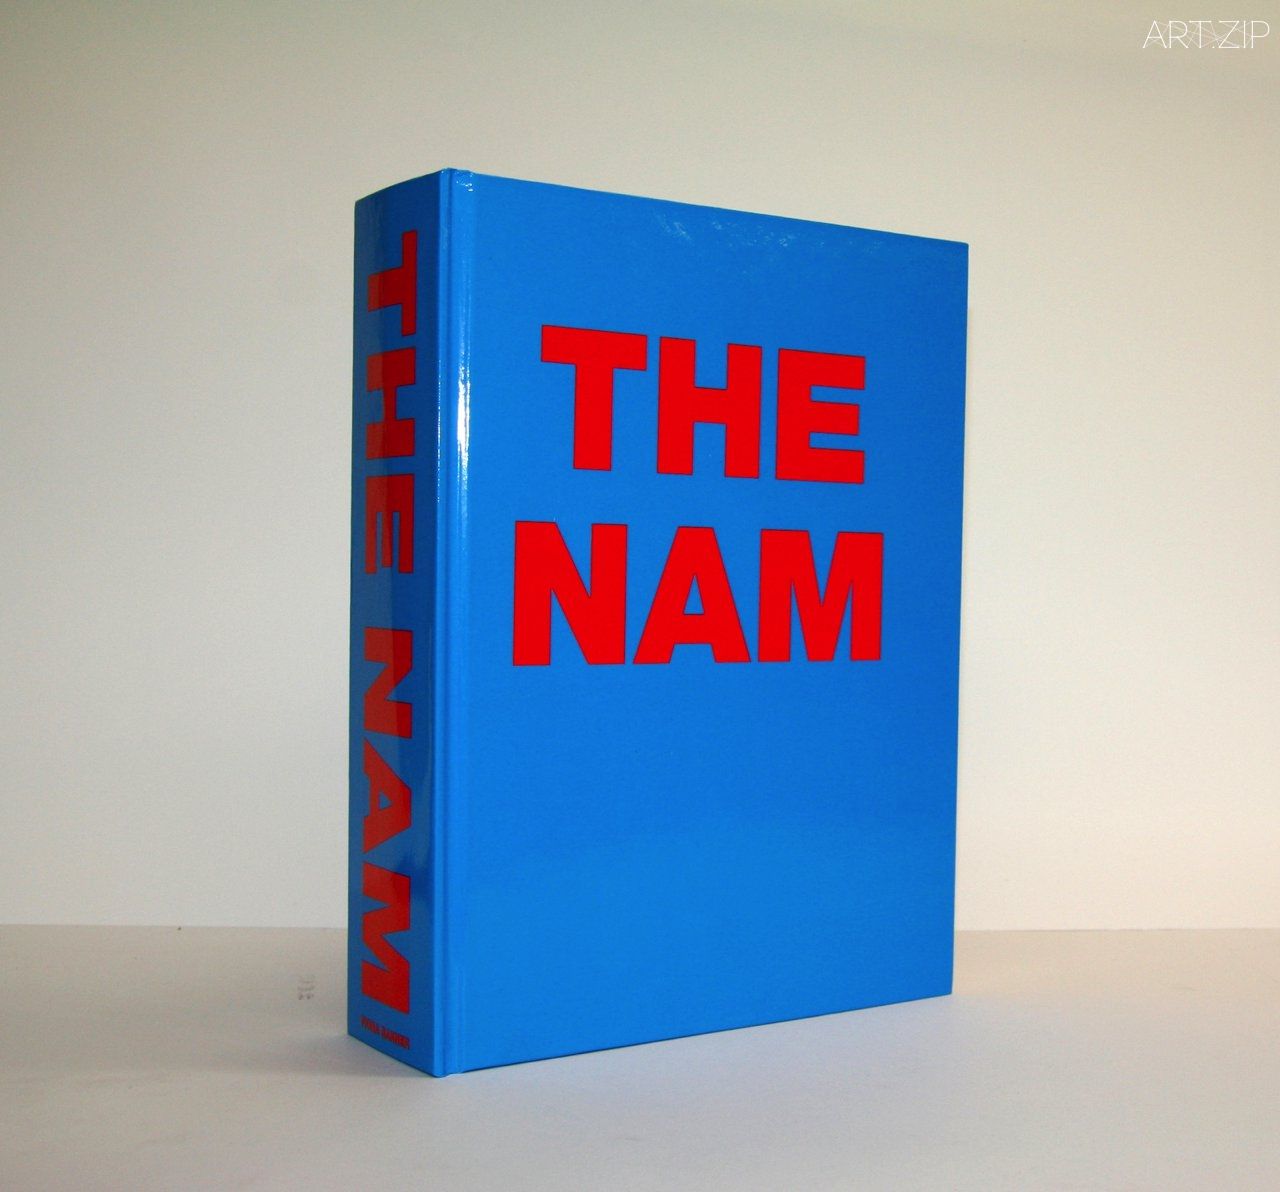 Fiona Banner, THE NAM, 1997 (1,000-page hardback published by Frith Street Books & The Vanity Press with assistance from Arts Council England © and courtesy the artist 